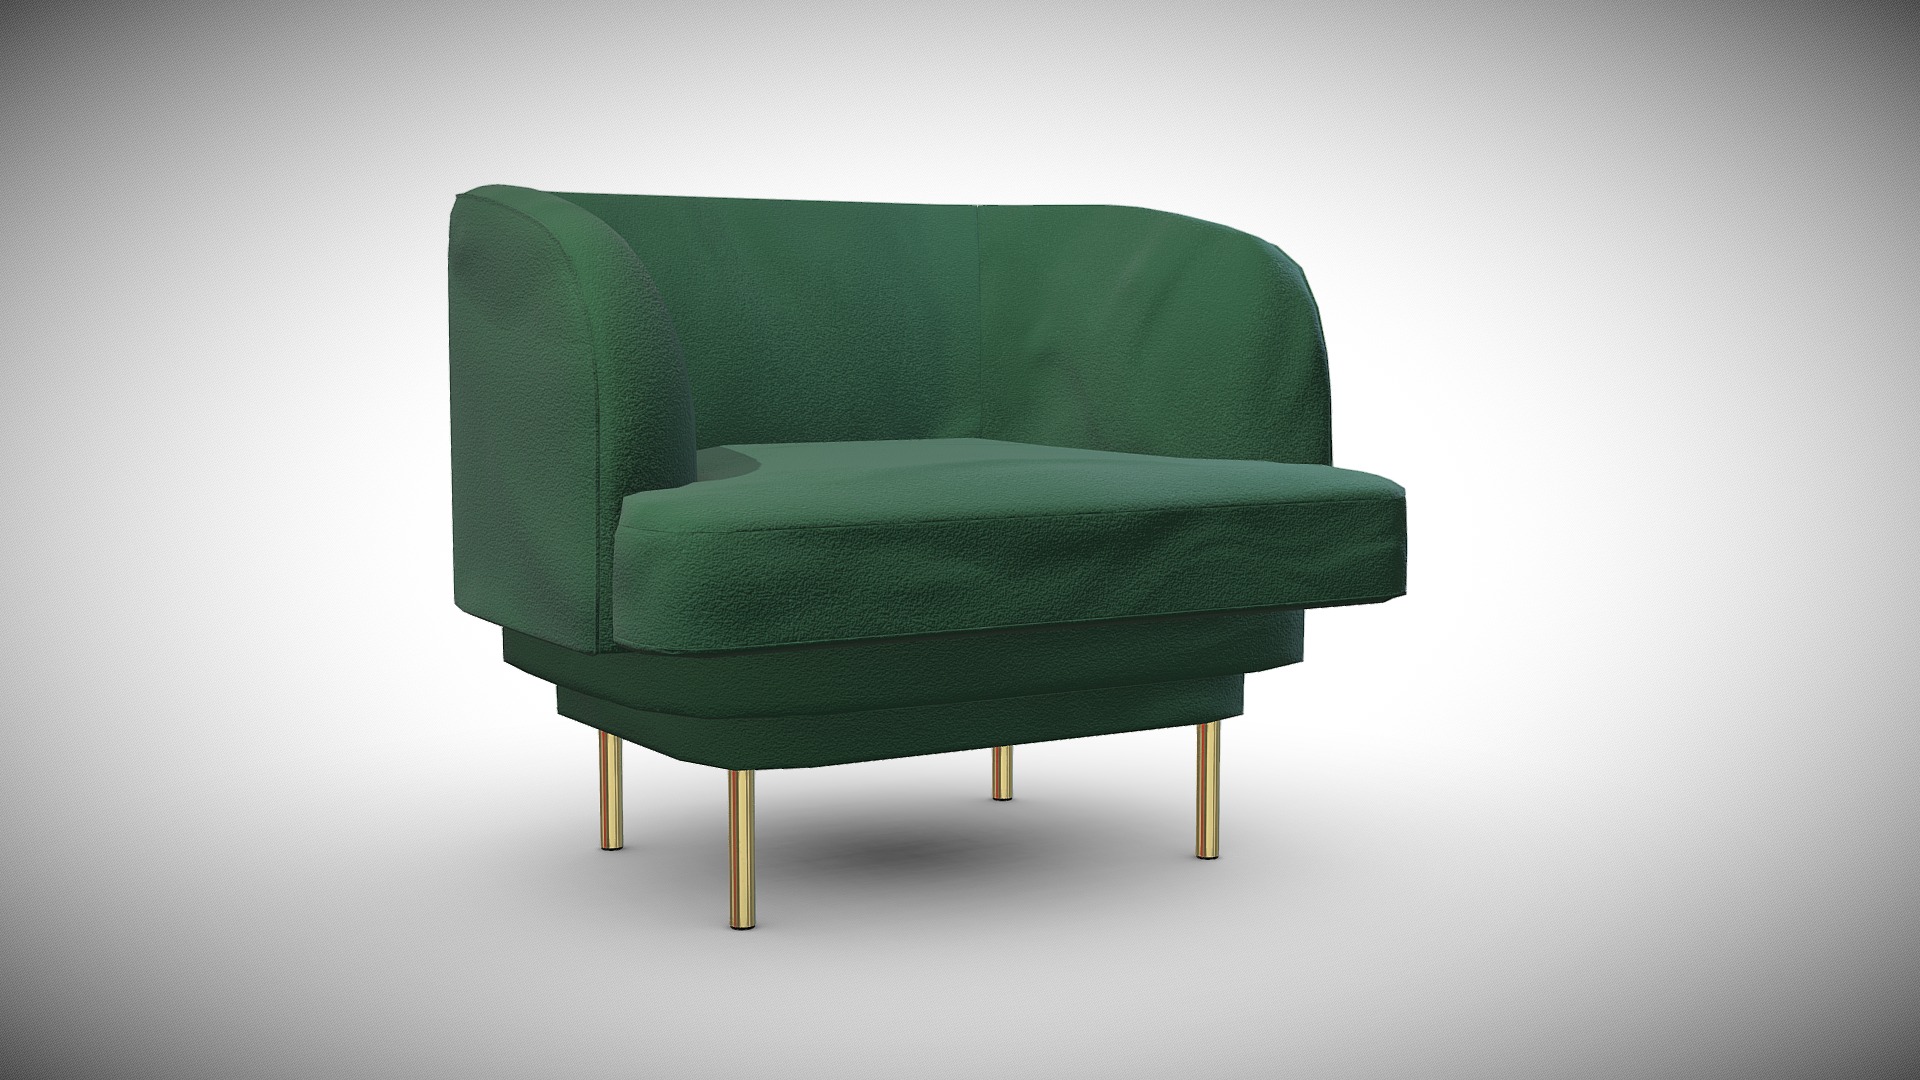 3D model CORNICE ARMCHAIR VELVET - This is a 3D model of the CORNICE ARMCHAIR VELVET. The 3D model is about a green chair with a cushion.